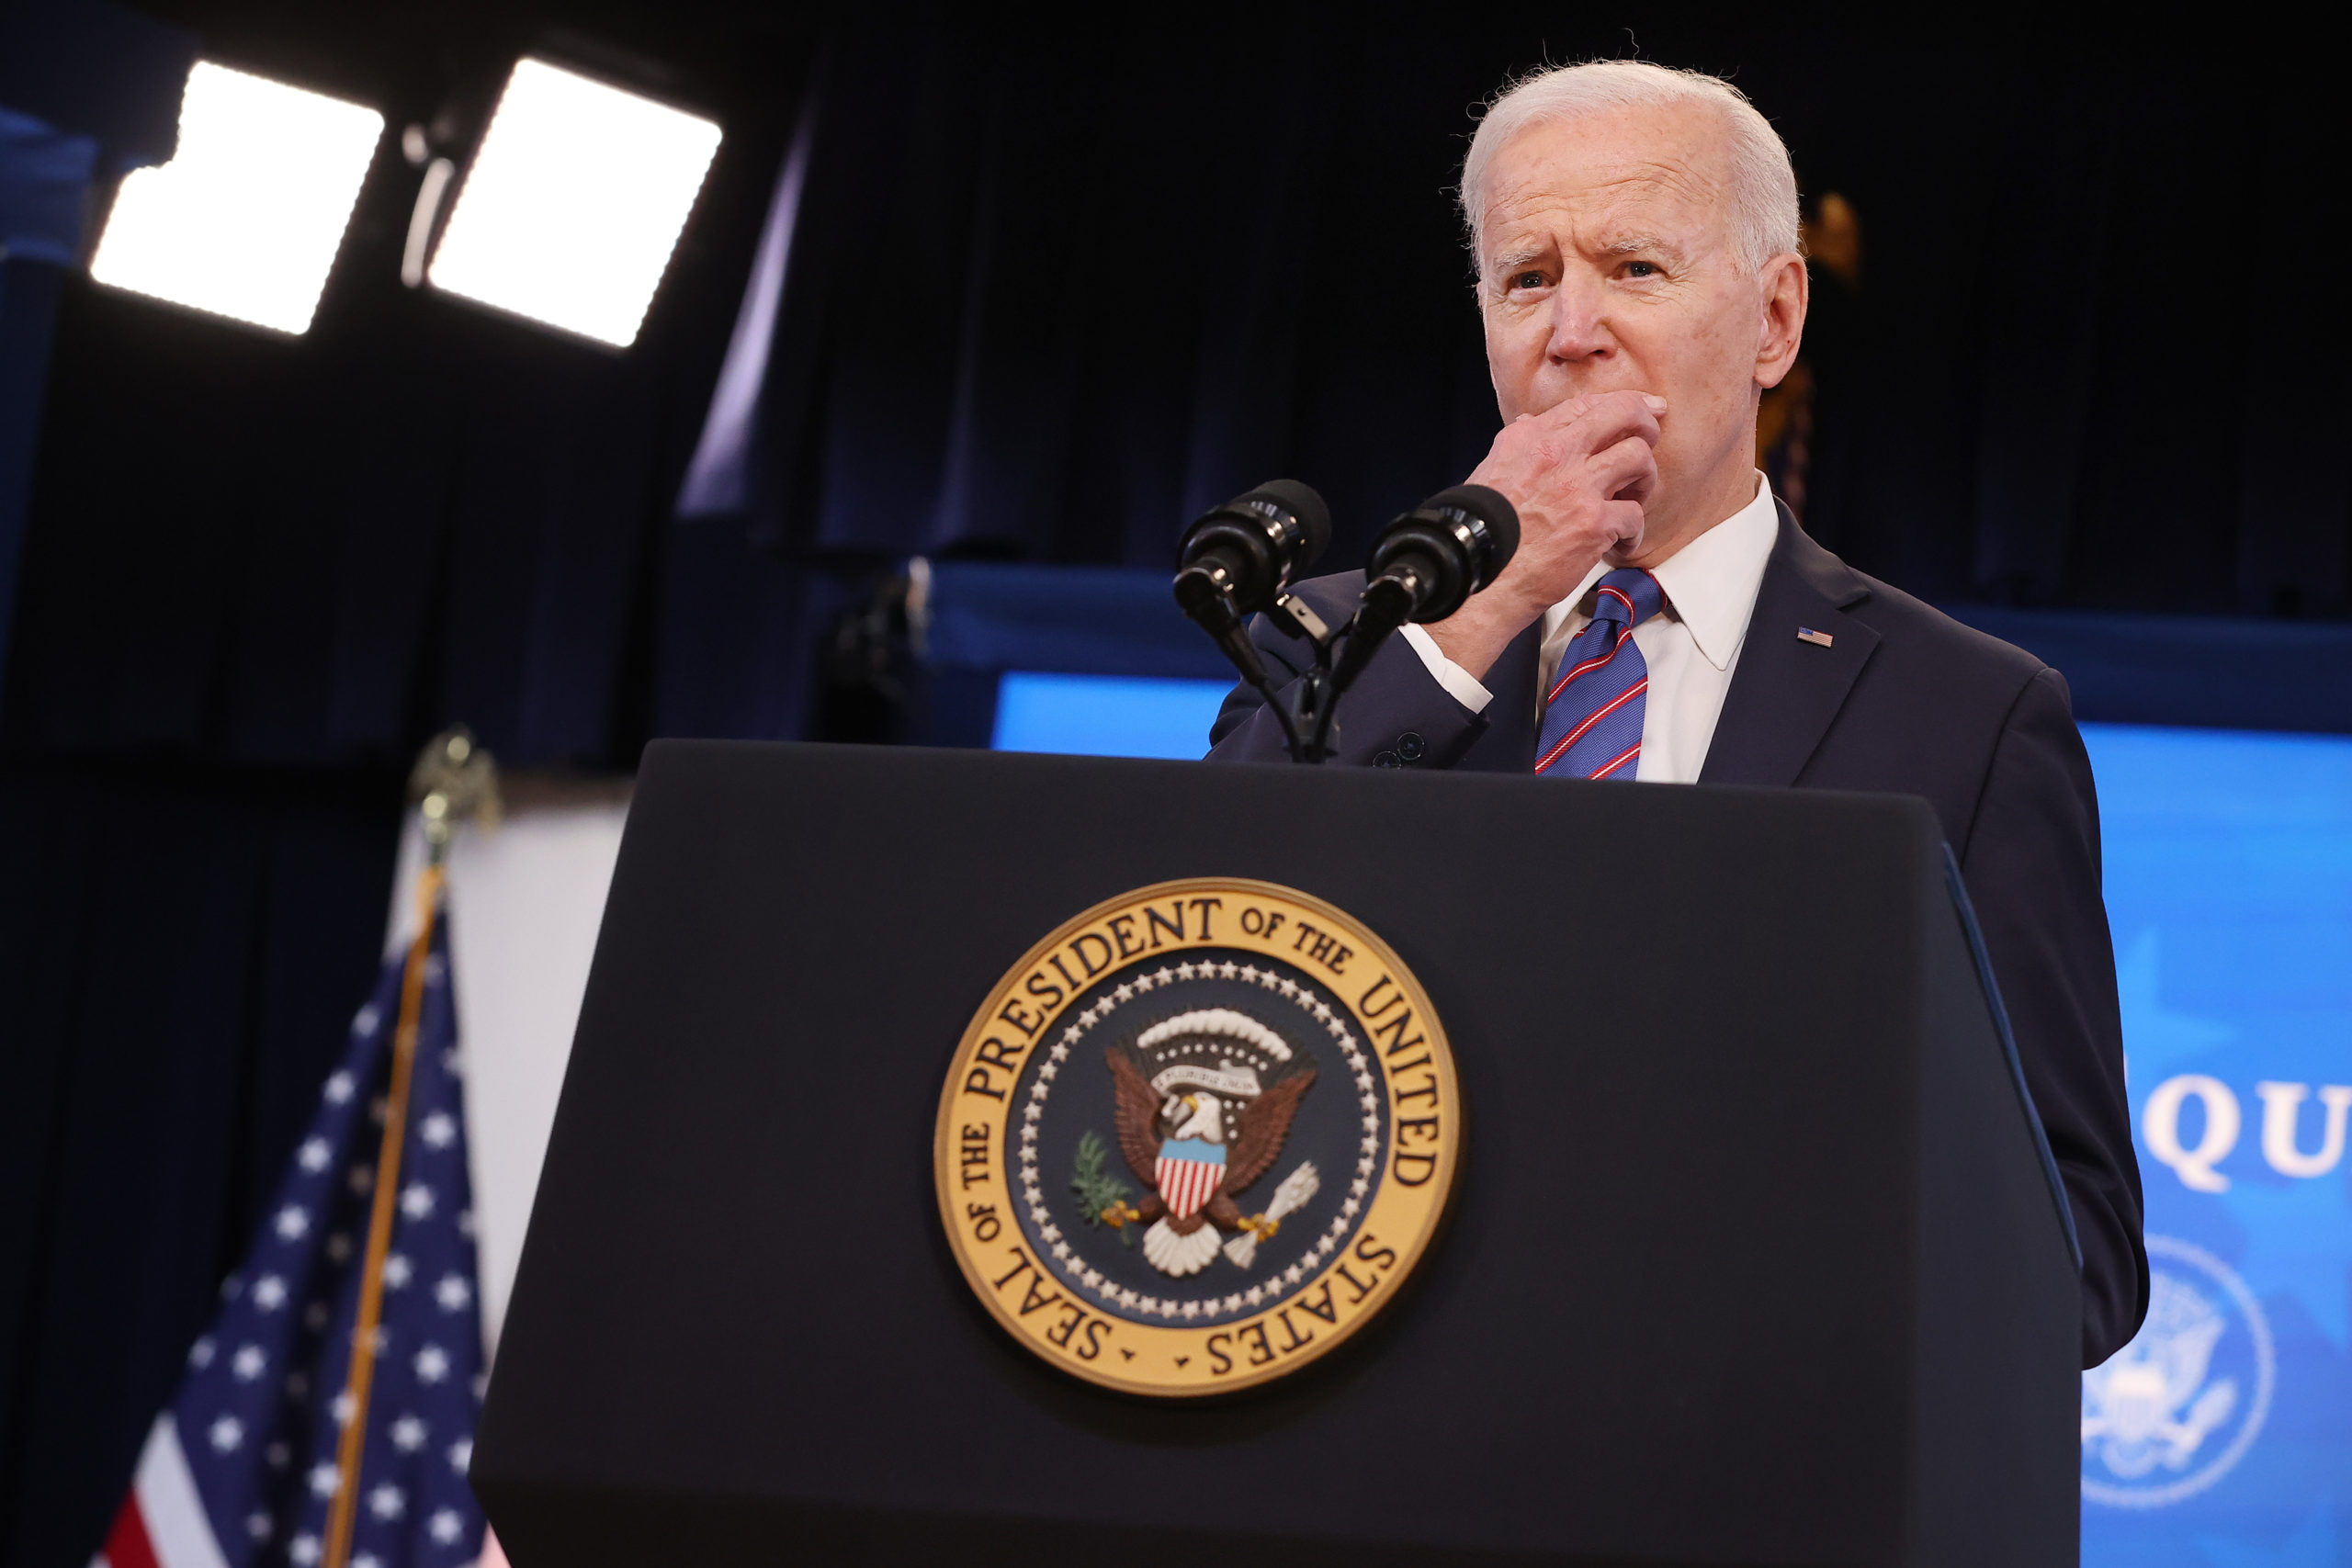 WASHINGTON, DC - MARCH 24: U.S. President Joe Biden delivers remarks during an Equal Pay Day event in the South Court Auditorium in the Eisenhower Executive Office Building on March 24, 2021 in Washington, DC. Highlighting the gender pay gap, Equal Pay Day raises awareness that women in the United States earned $0.82 for every dollar men earned in 2019, according to the National Committee on Pay Equity. (Photo by Chip Somodevilla/Getty Images)